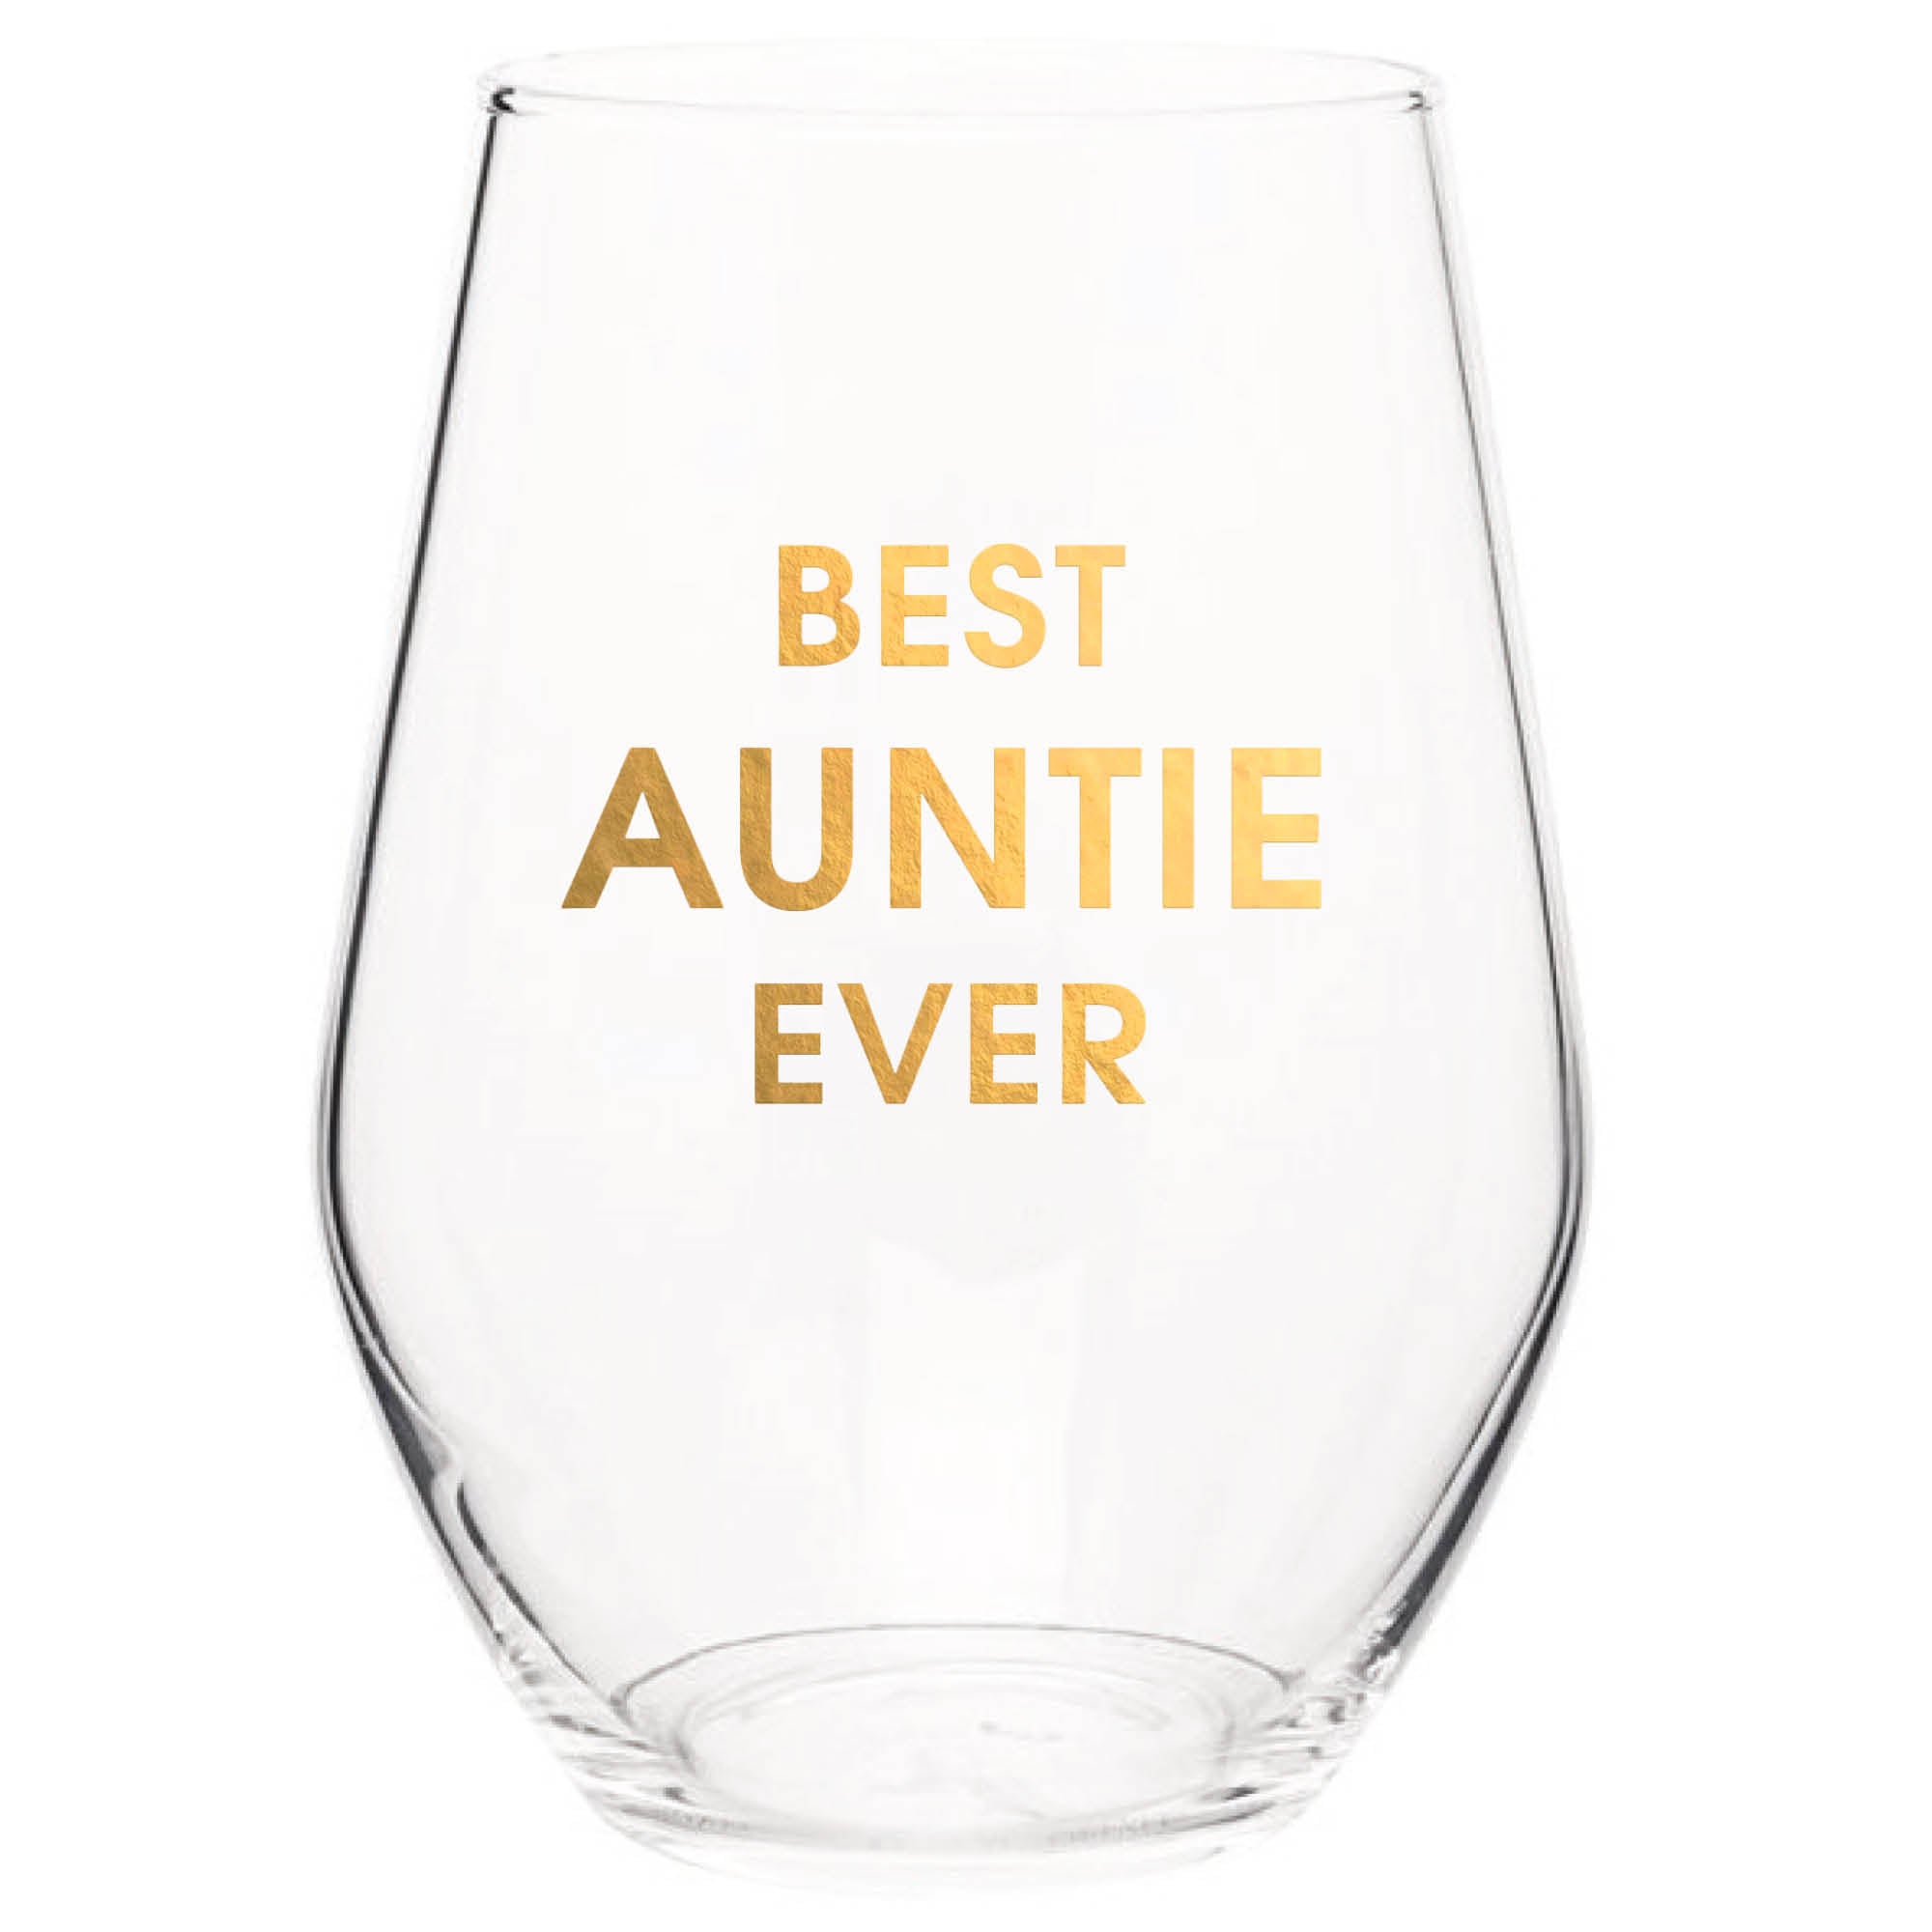 Best Auntie Ever - Gold Foil Stemless Wine Glass